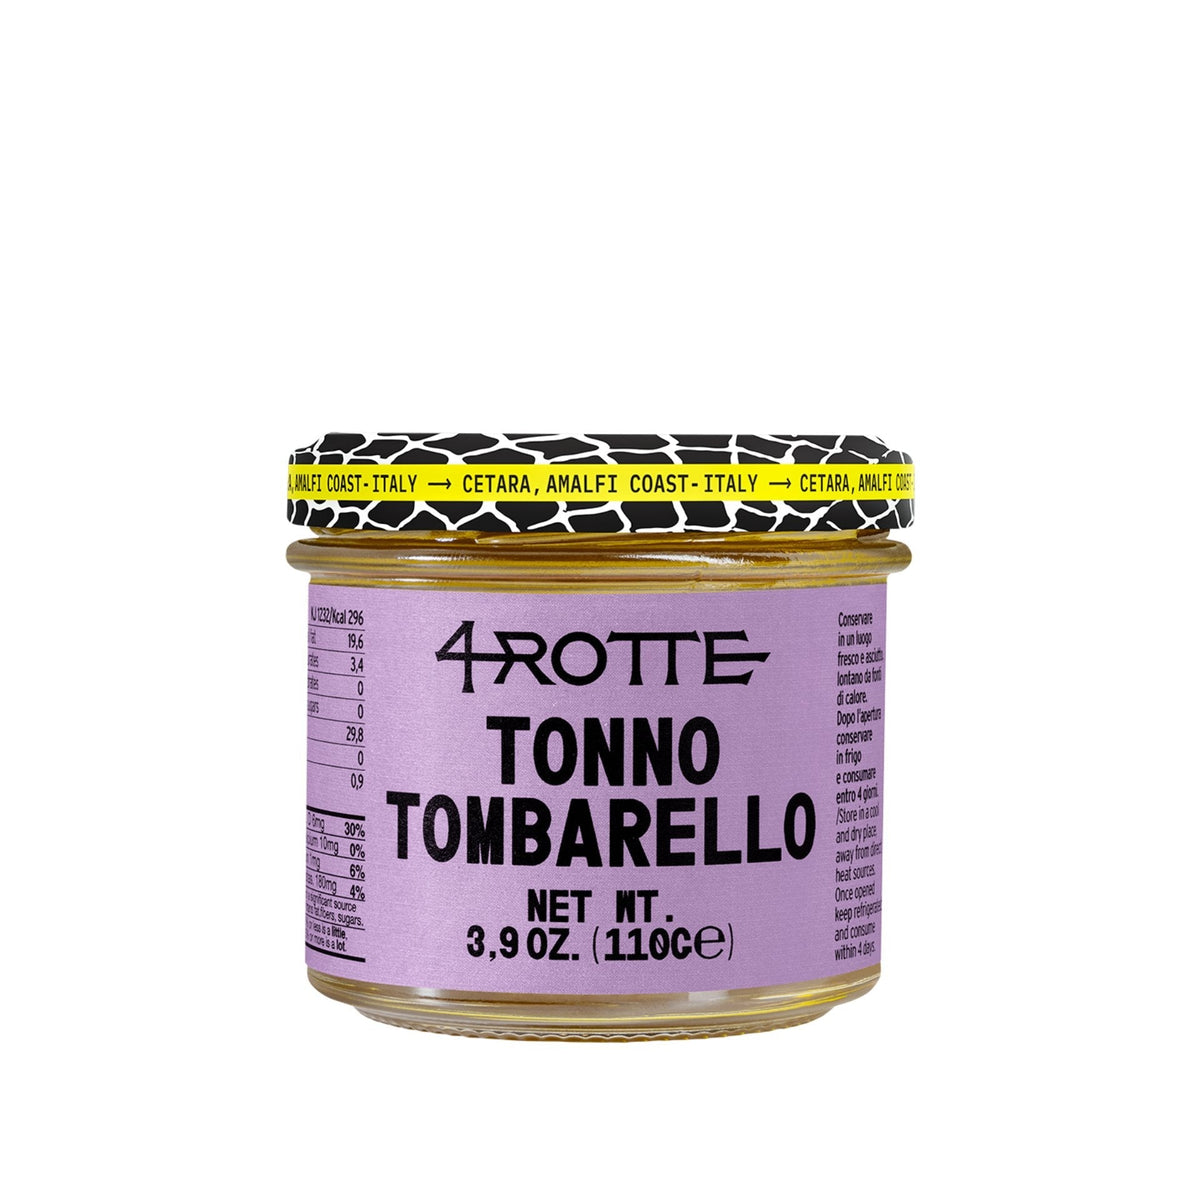 Armatore 4 Rotte Fillets in Olive Oil 110g  | Imported and distributed in the UK by Just Gourmet Foods